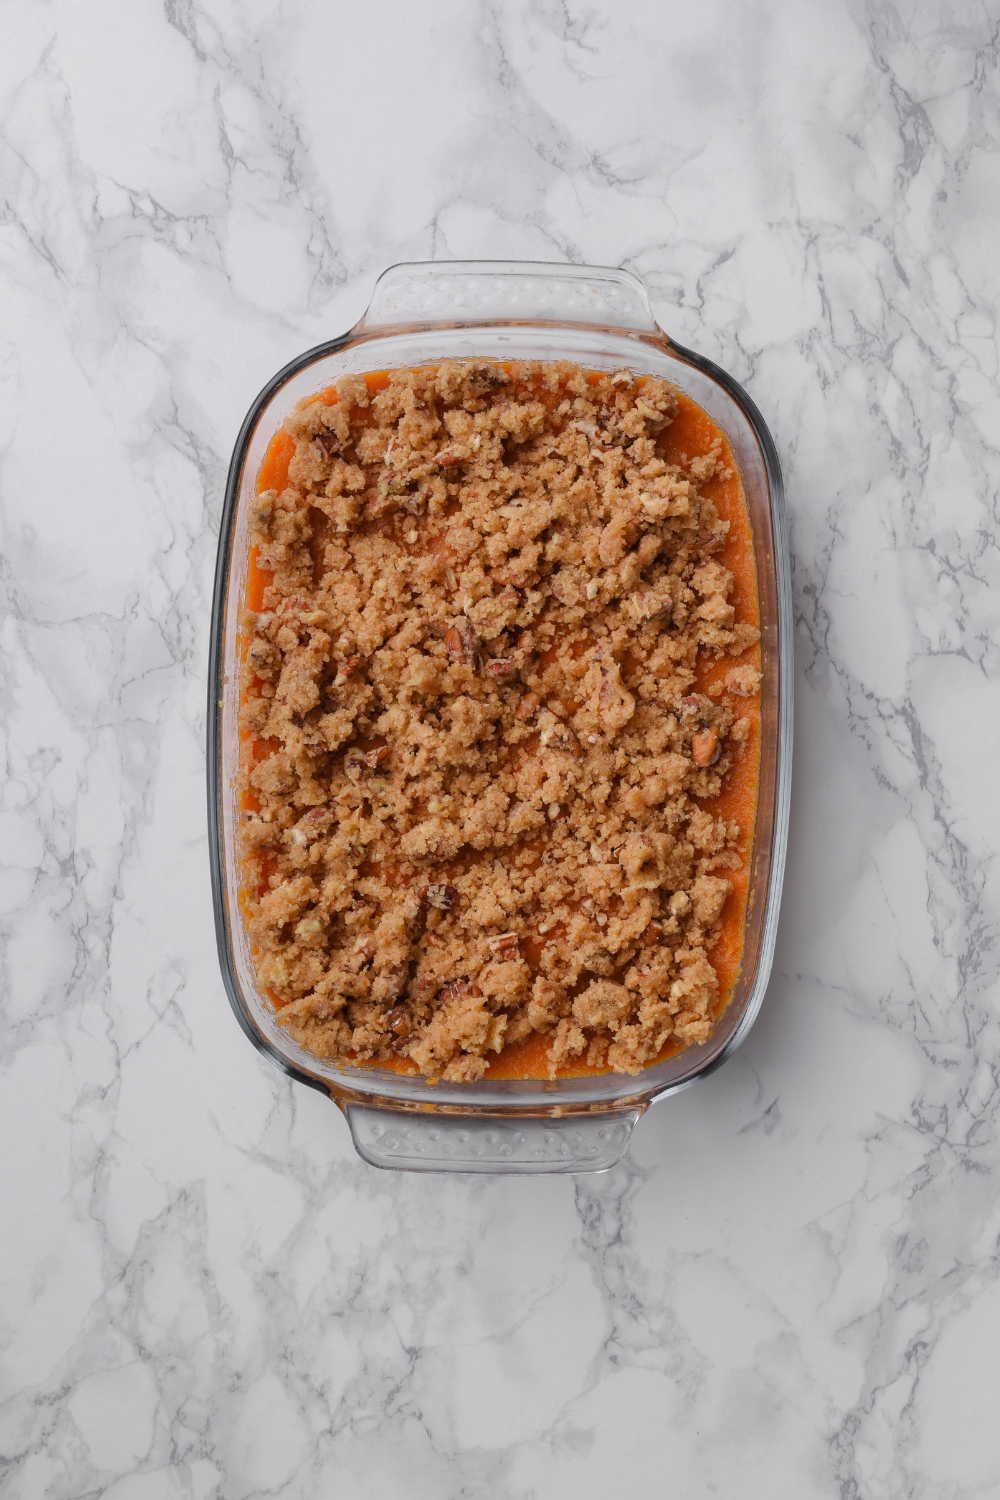 A clear baking dish filled with sweet potato puree and a pecan and brown sugar topping.